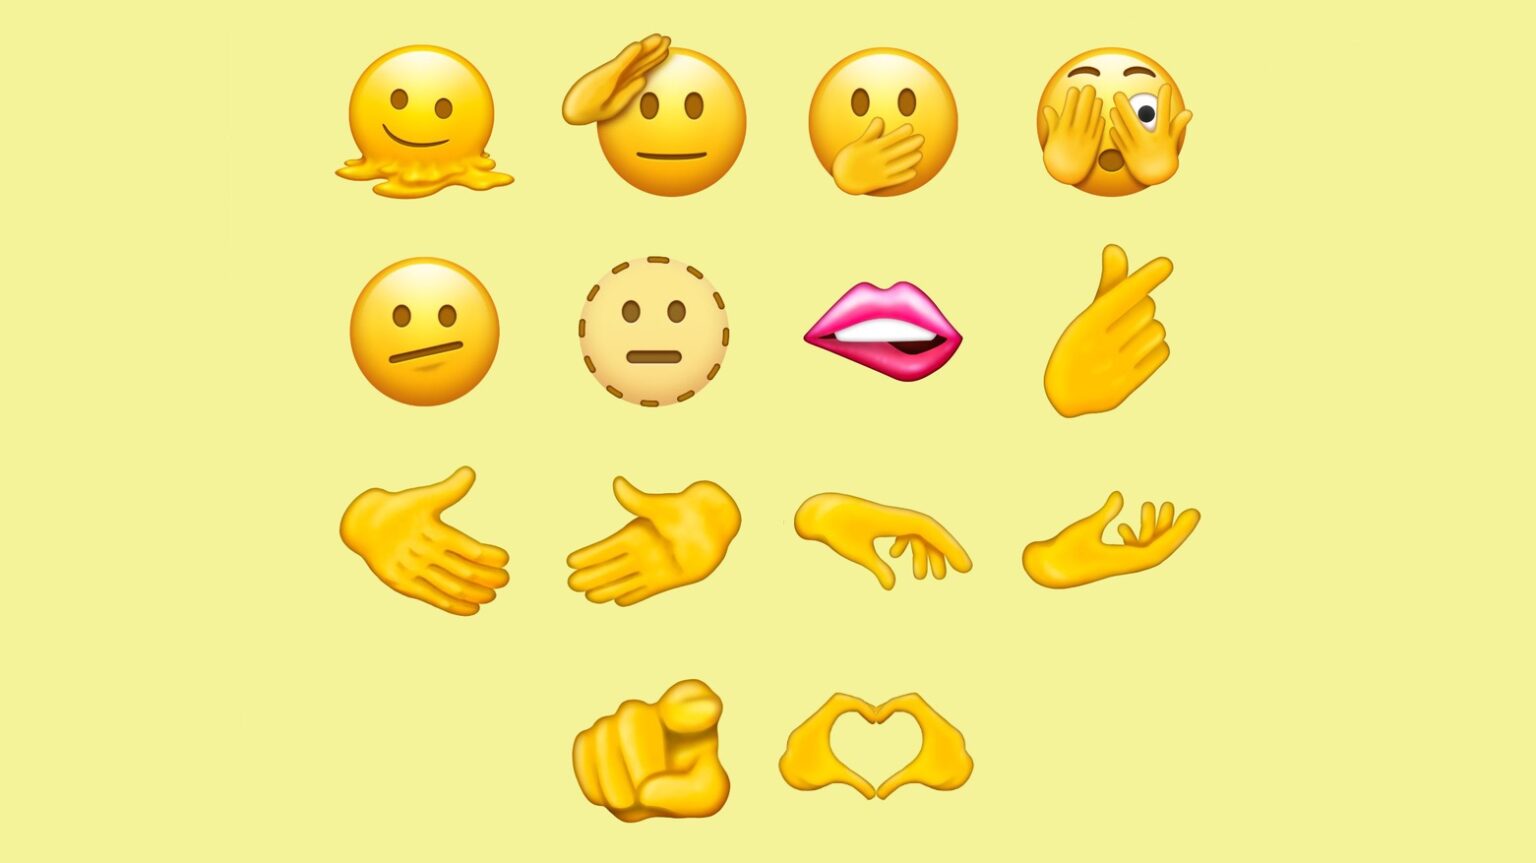 Next round of new emoji will let you salute, melt, gasp and point